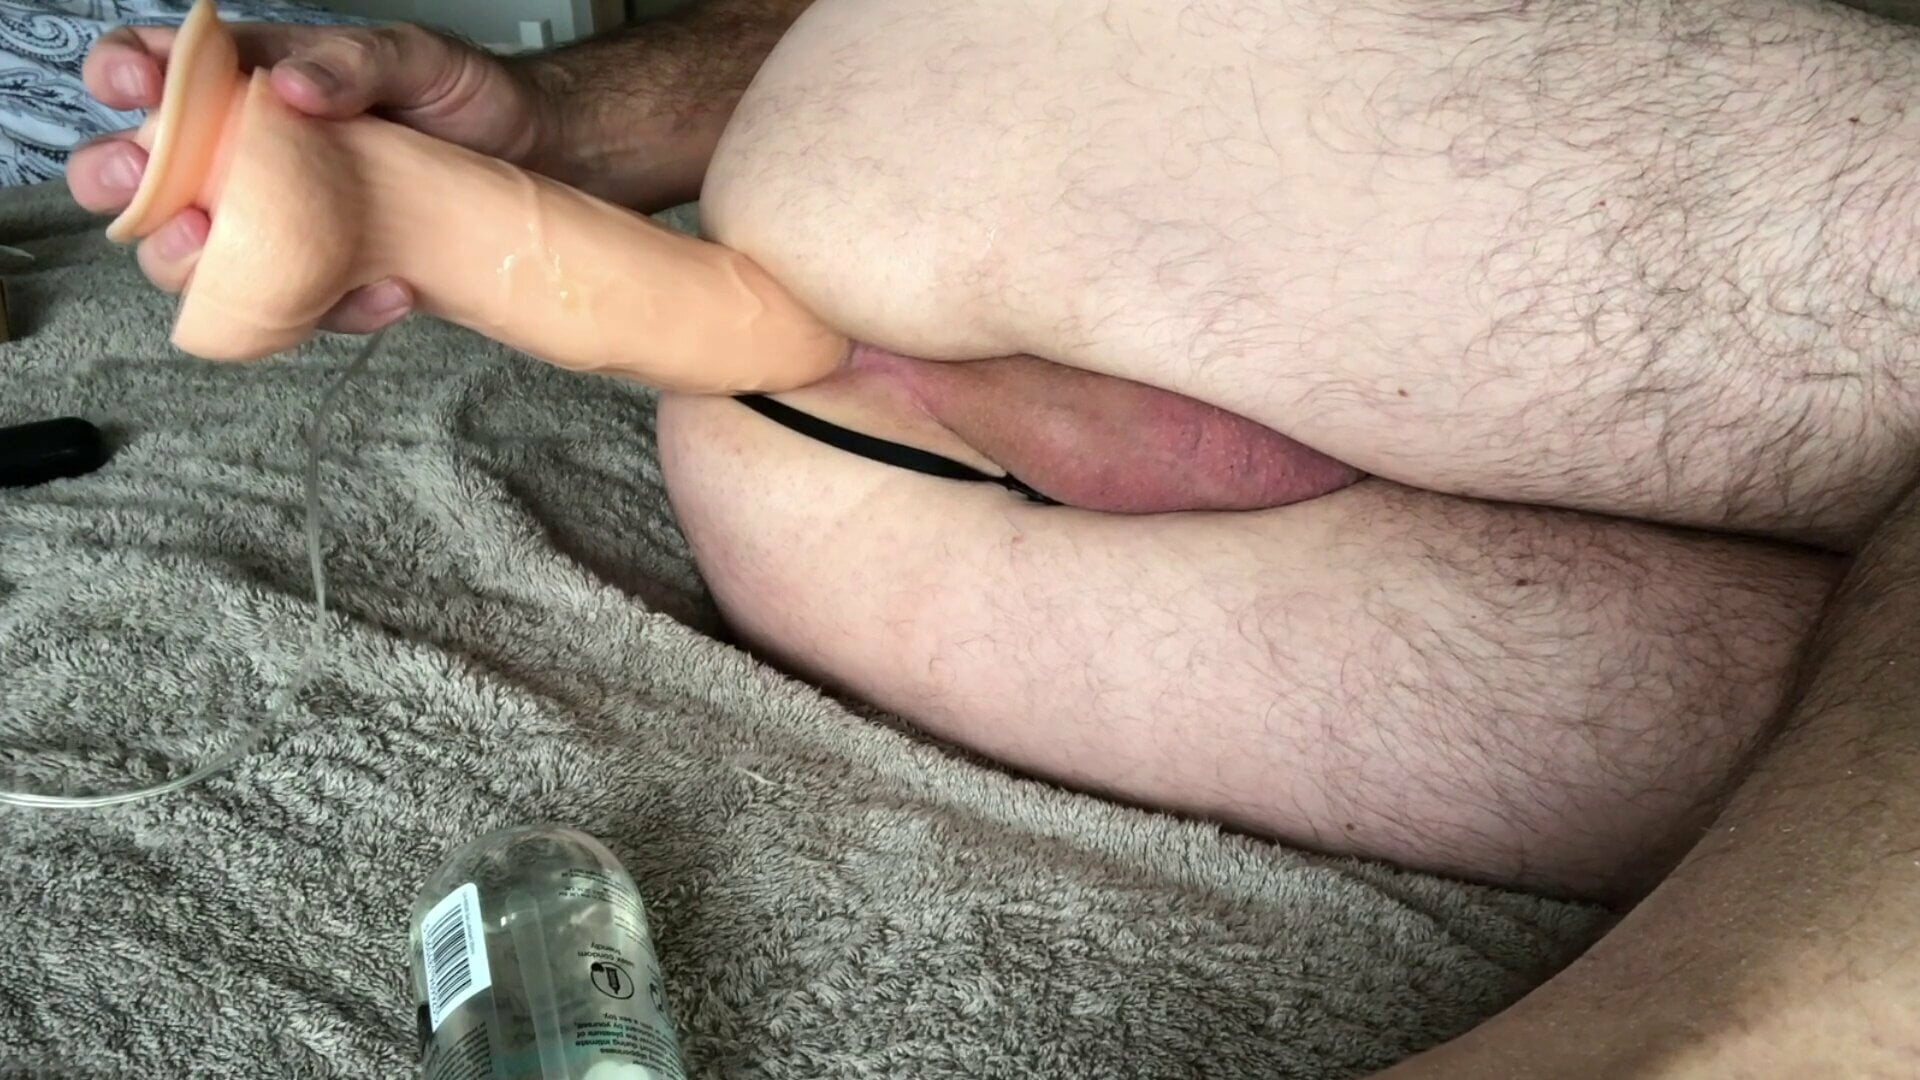 Guy in thong takes ten inch anal dildo till he cums - 5